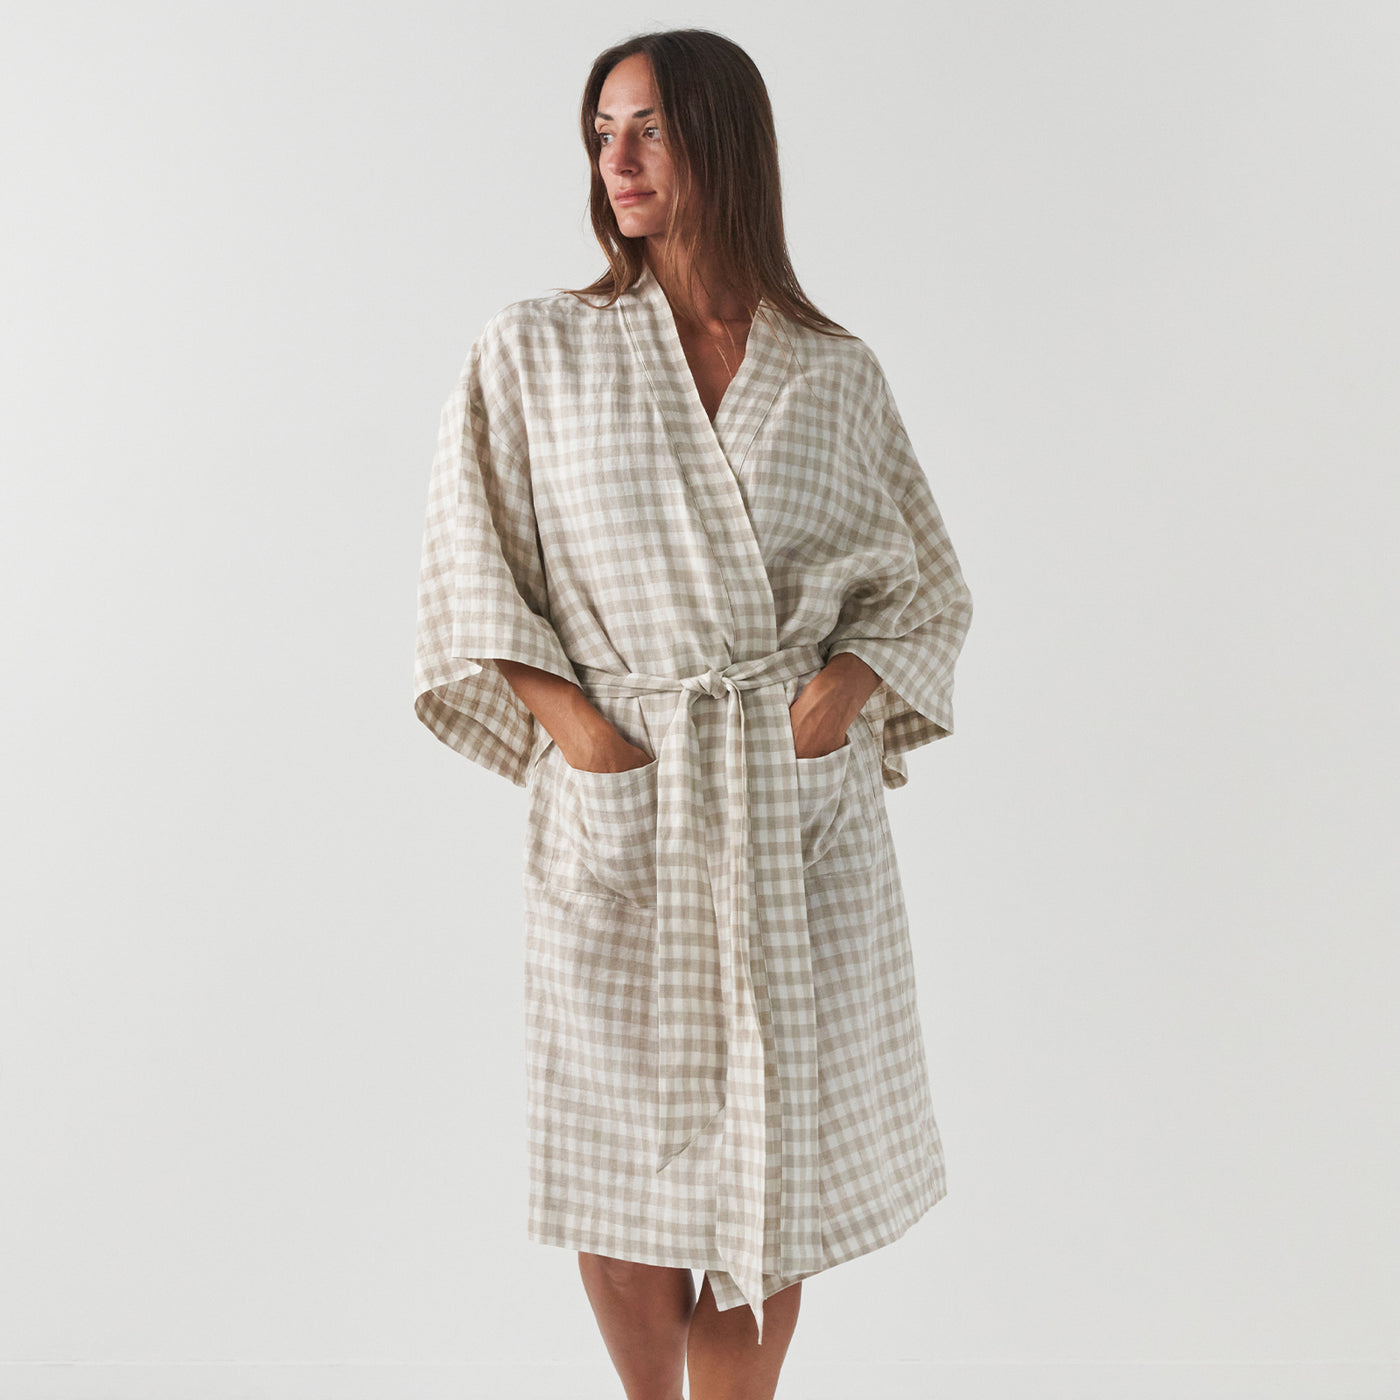 French Flax Linen Robe in Beige Gingham